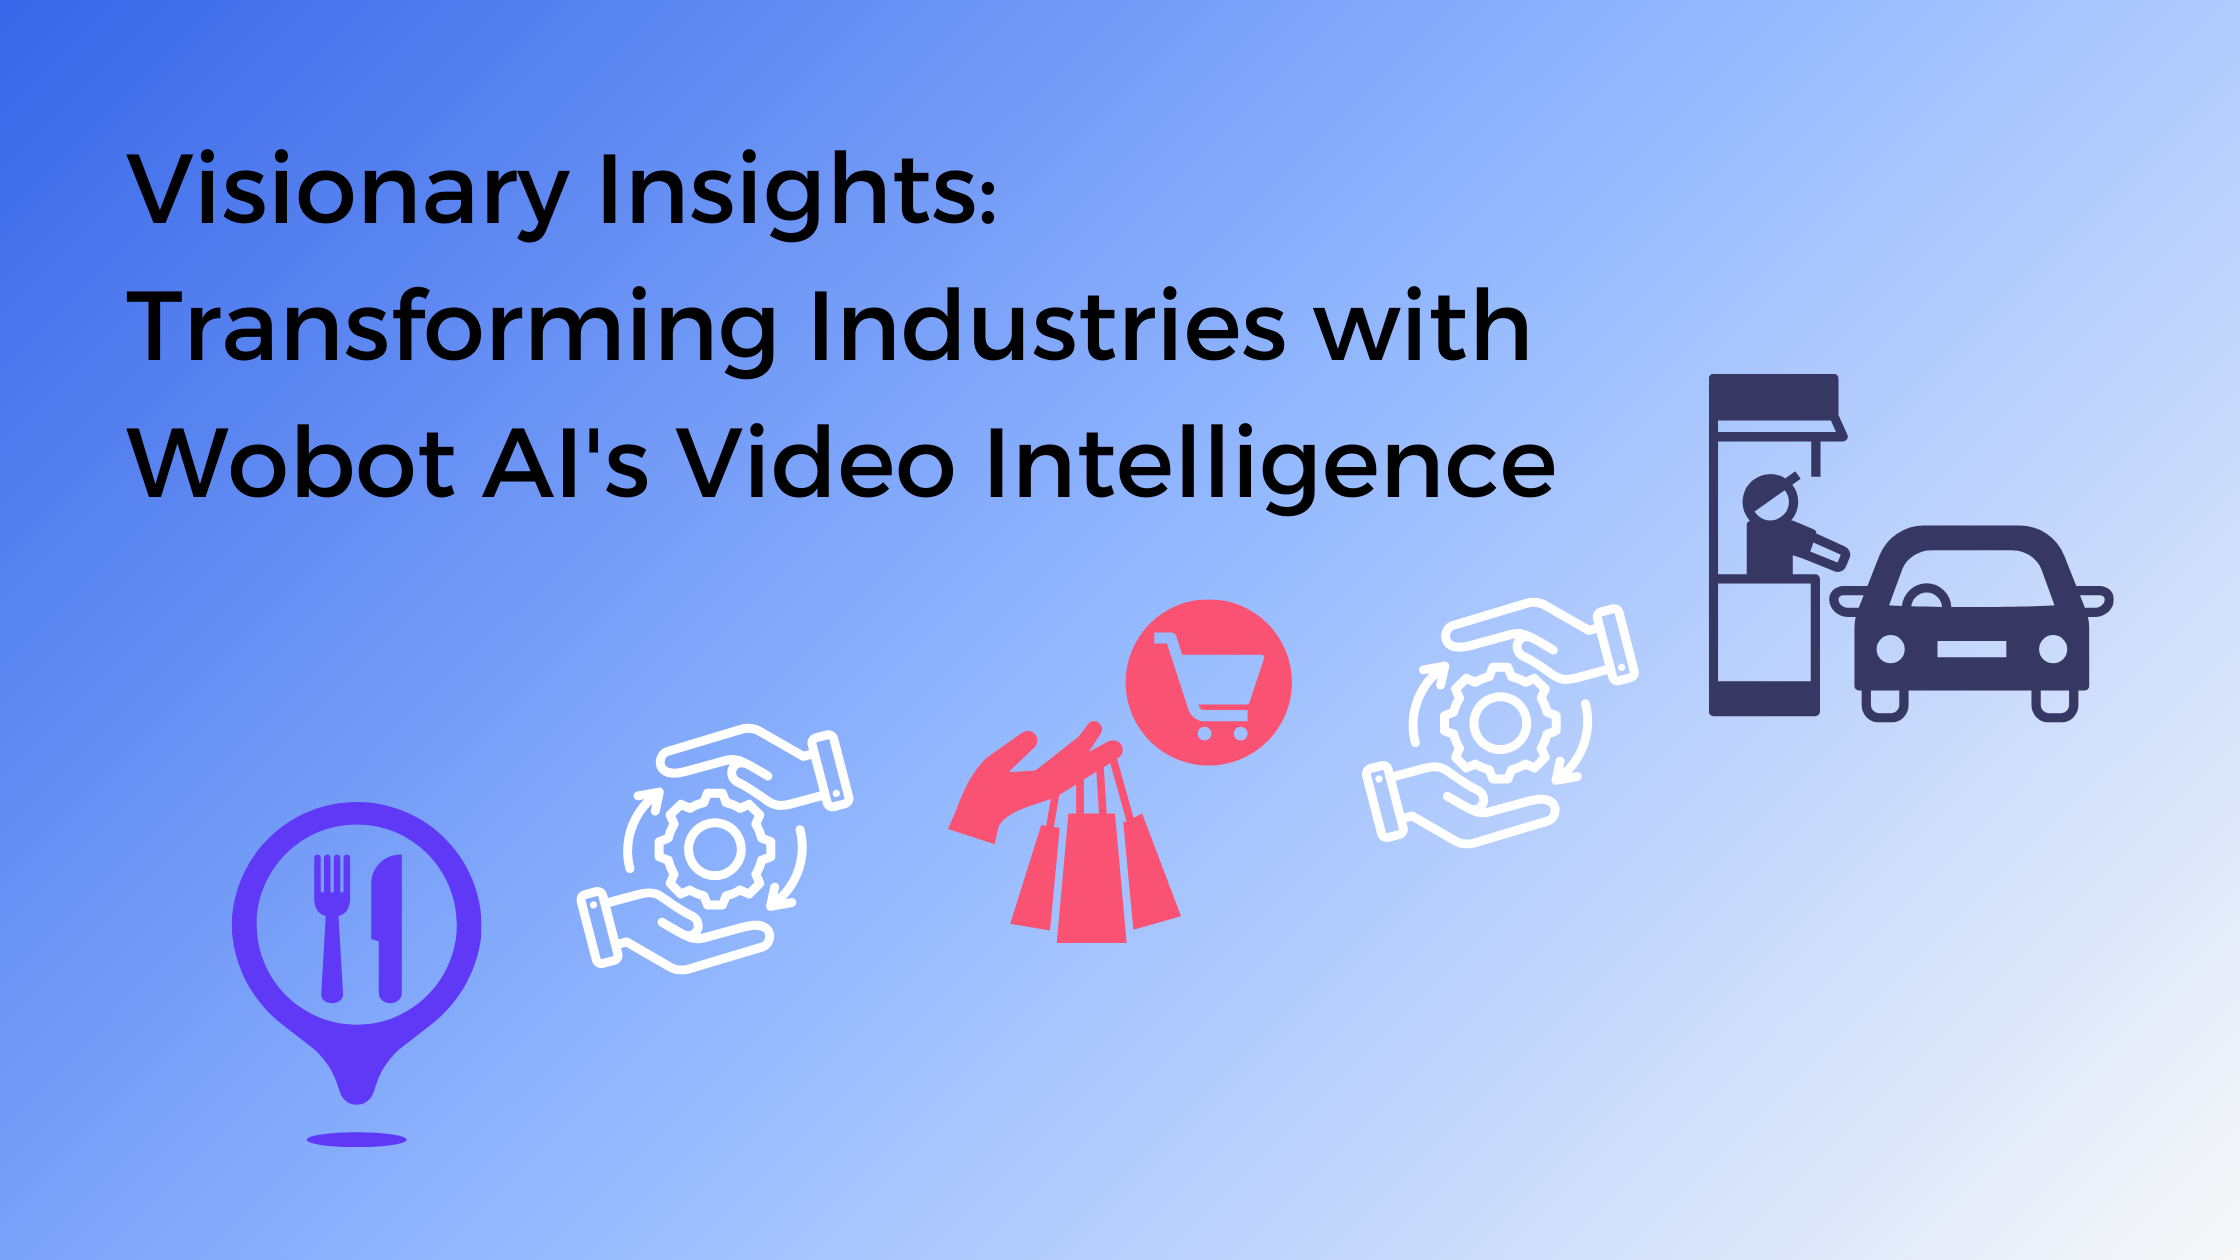 Visionary Insights- Transforming Industries with Wobot AI's Video Intelligence